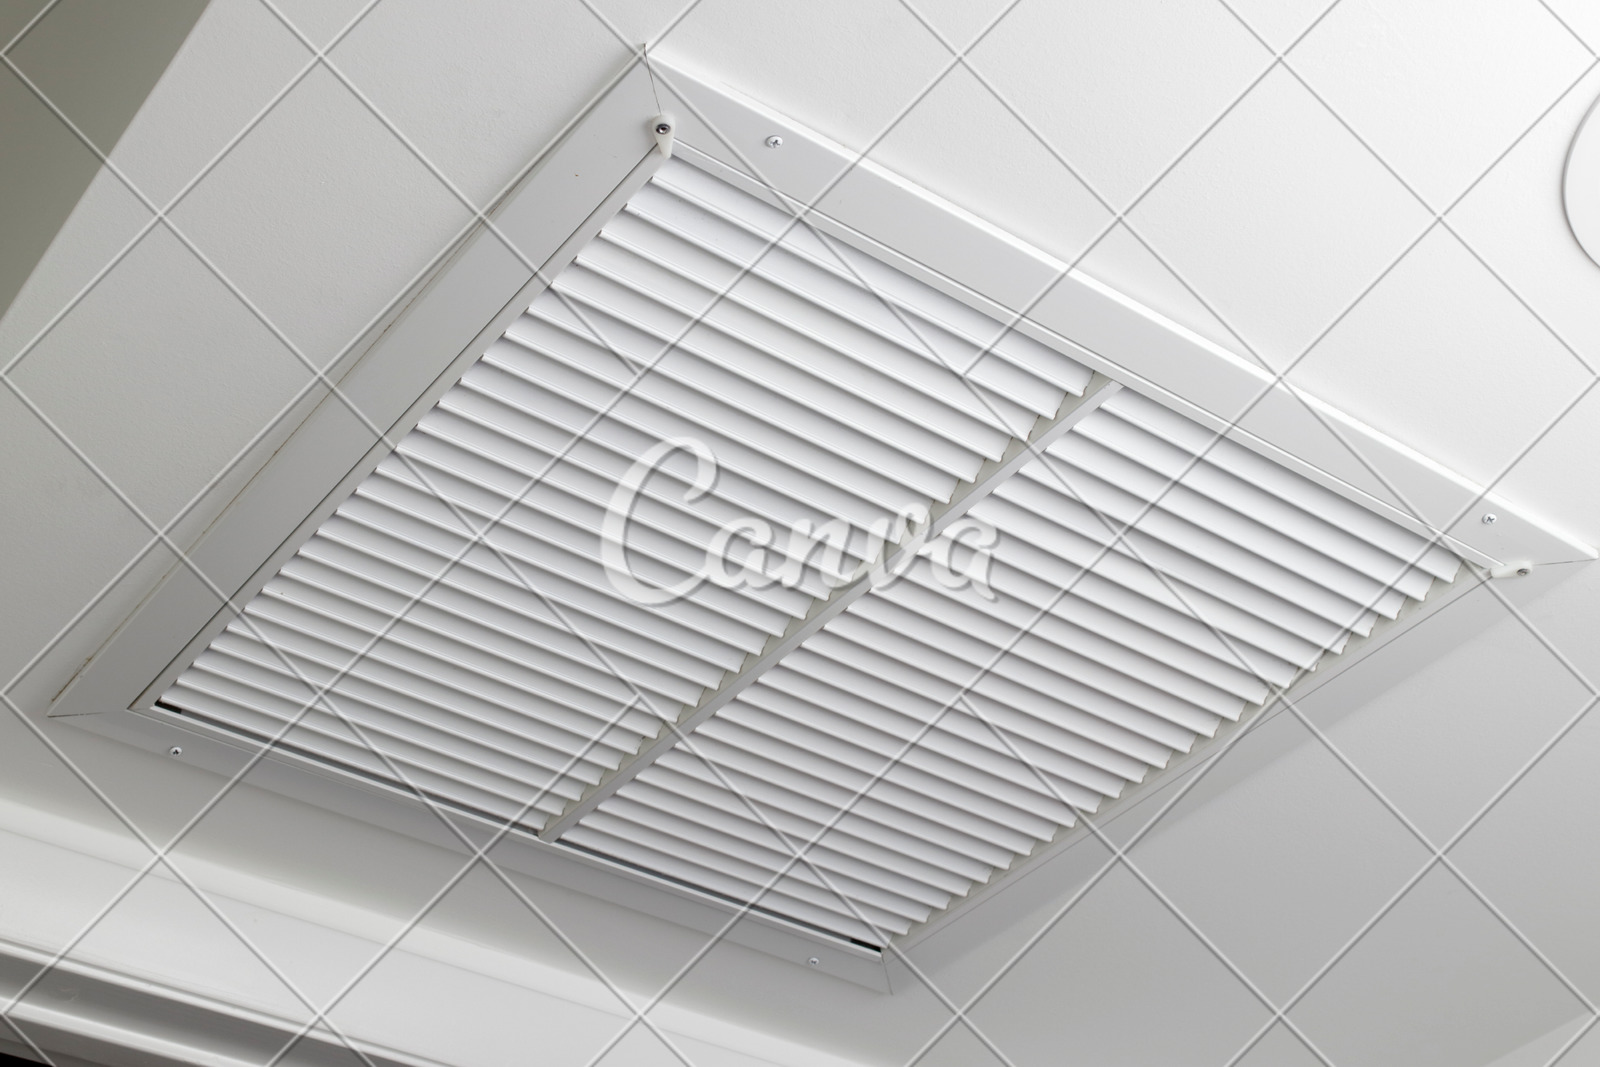 White Ceiling Air Filter Vent Grid Photos By Canva